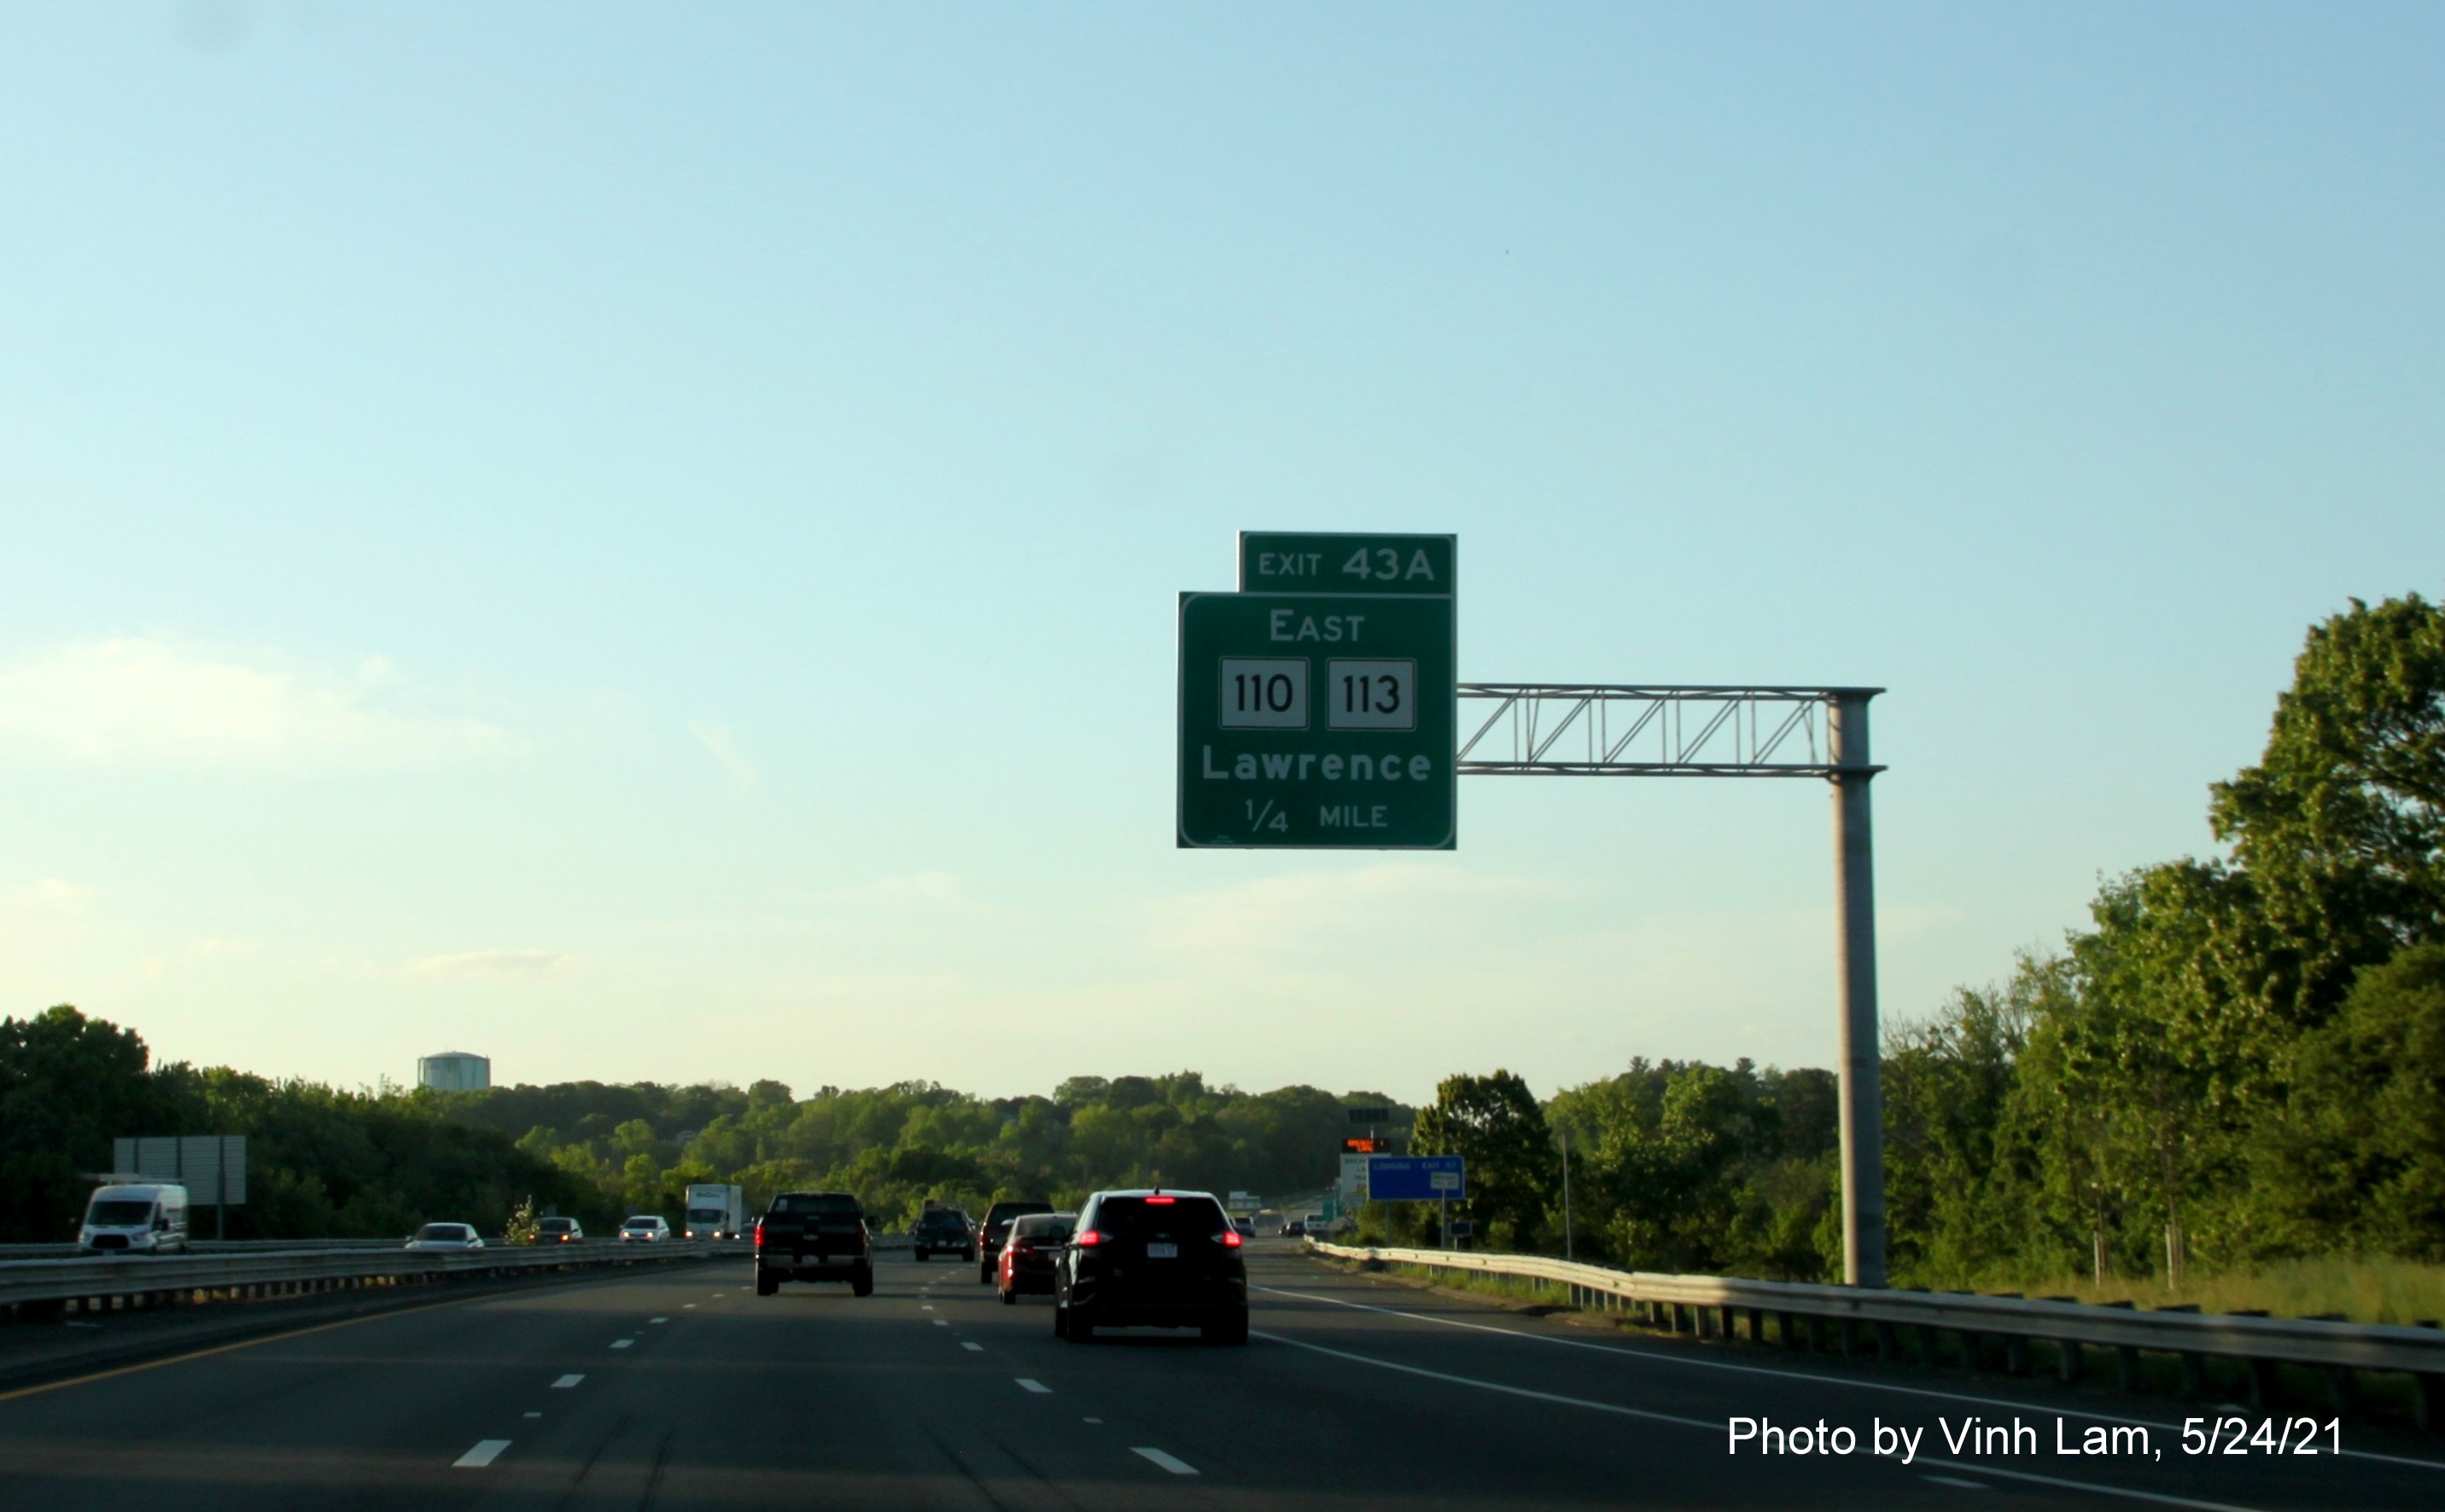 Image of 1/2 Mile advance overhead sign for MA 110/MA 113 East exit with new milepost based exit numbers on I-93 North in Andover, by Vinh Lam, May 2021